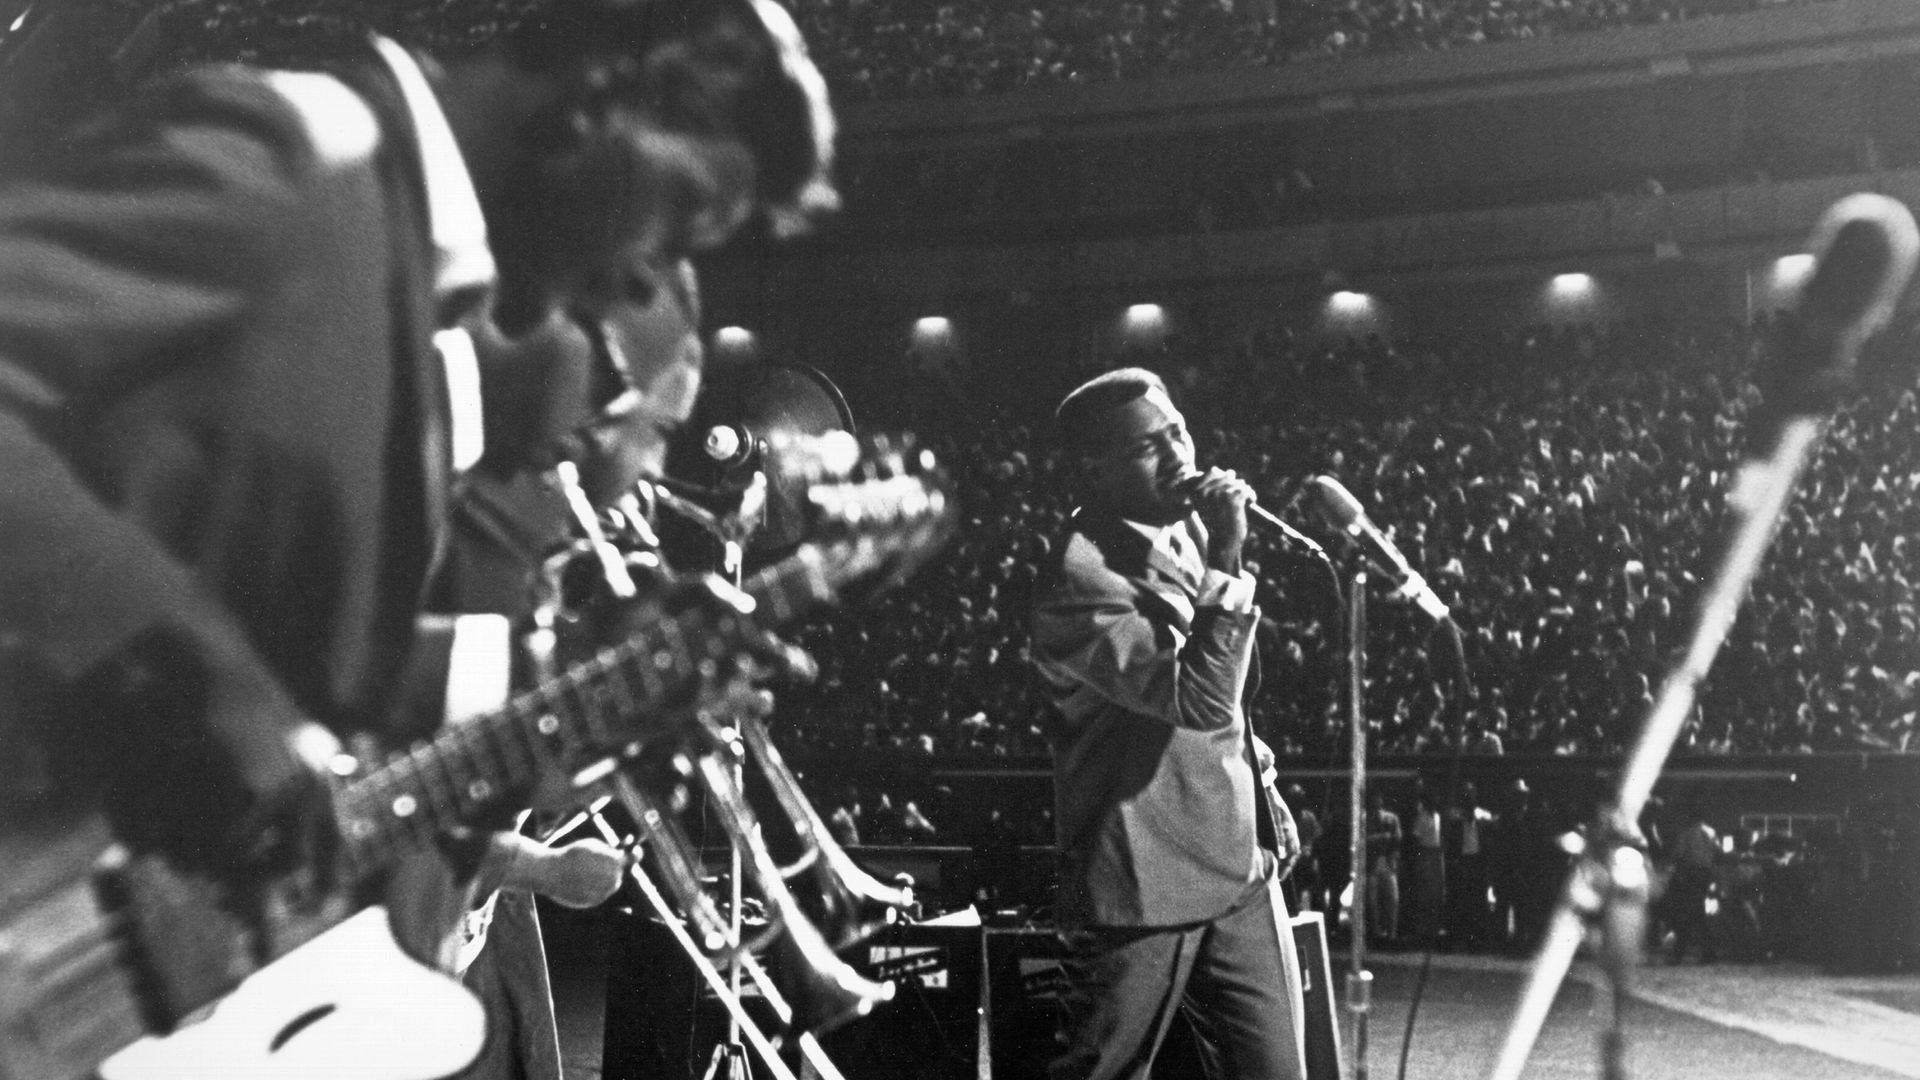 Otis Redding performs onstage in 1967 - Credit: Michael Ochs Archives/Getty Images